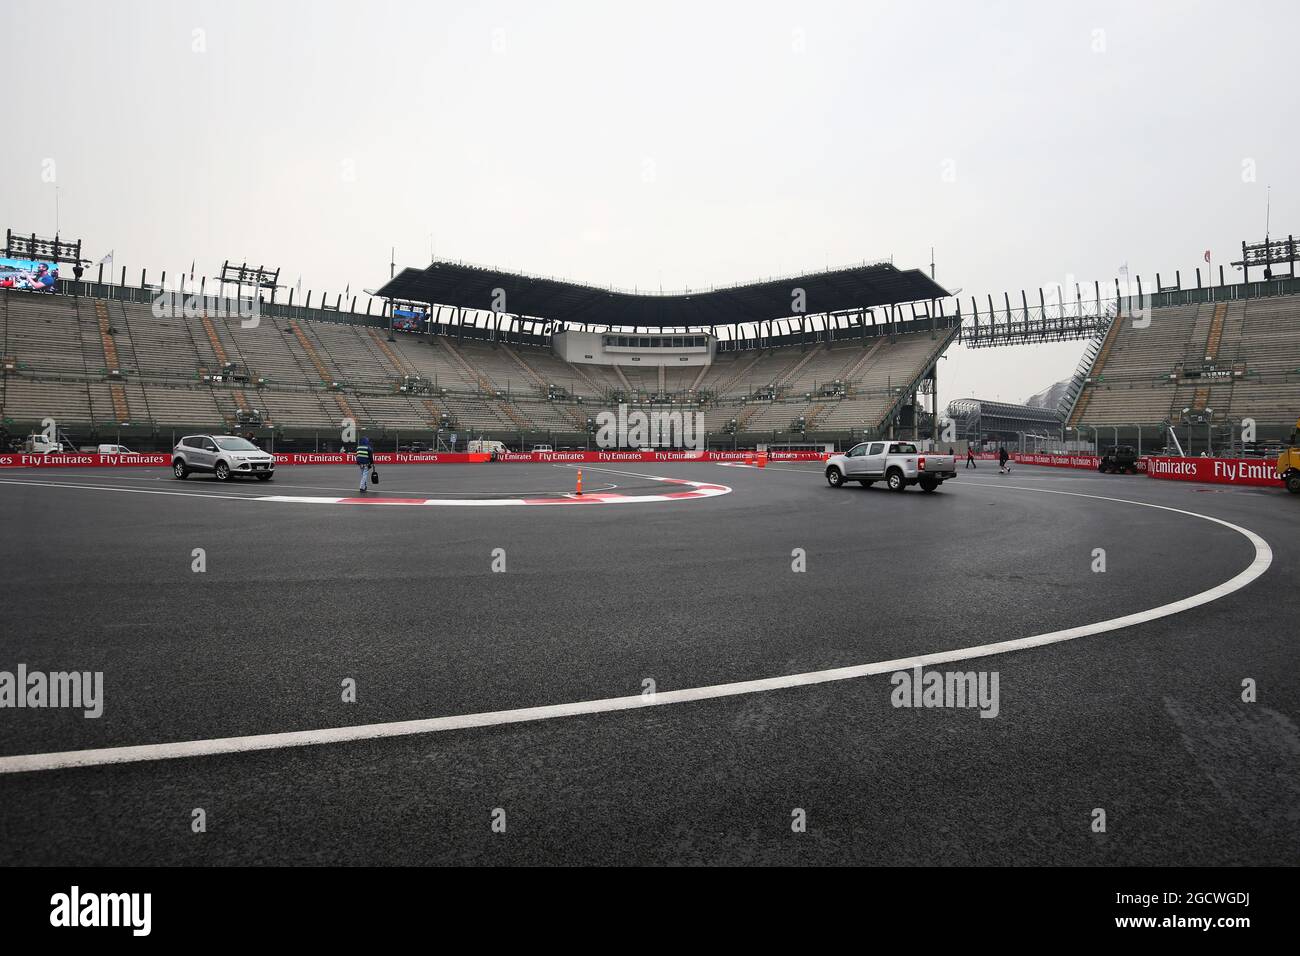 The stadium section. Mexican Grand Prix, Wednesday 28th October 2015. Mexico City, Mexico. Stock Photo